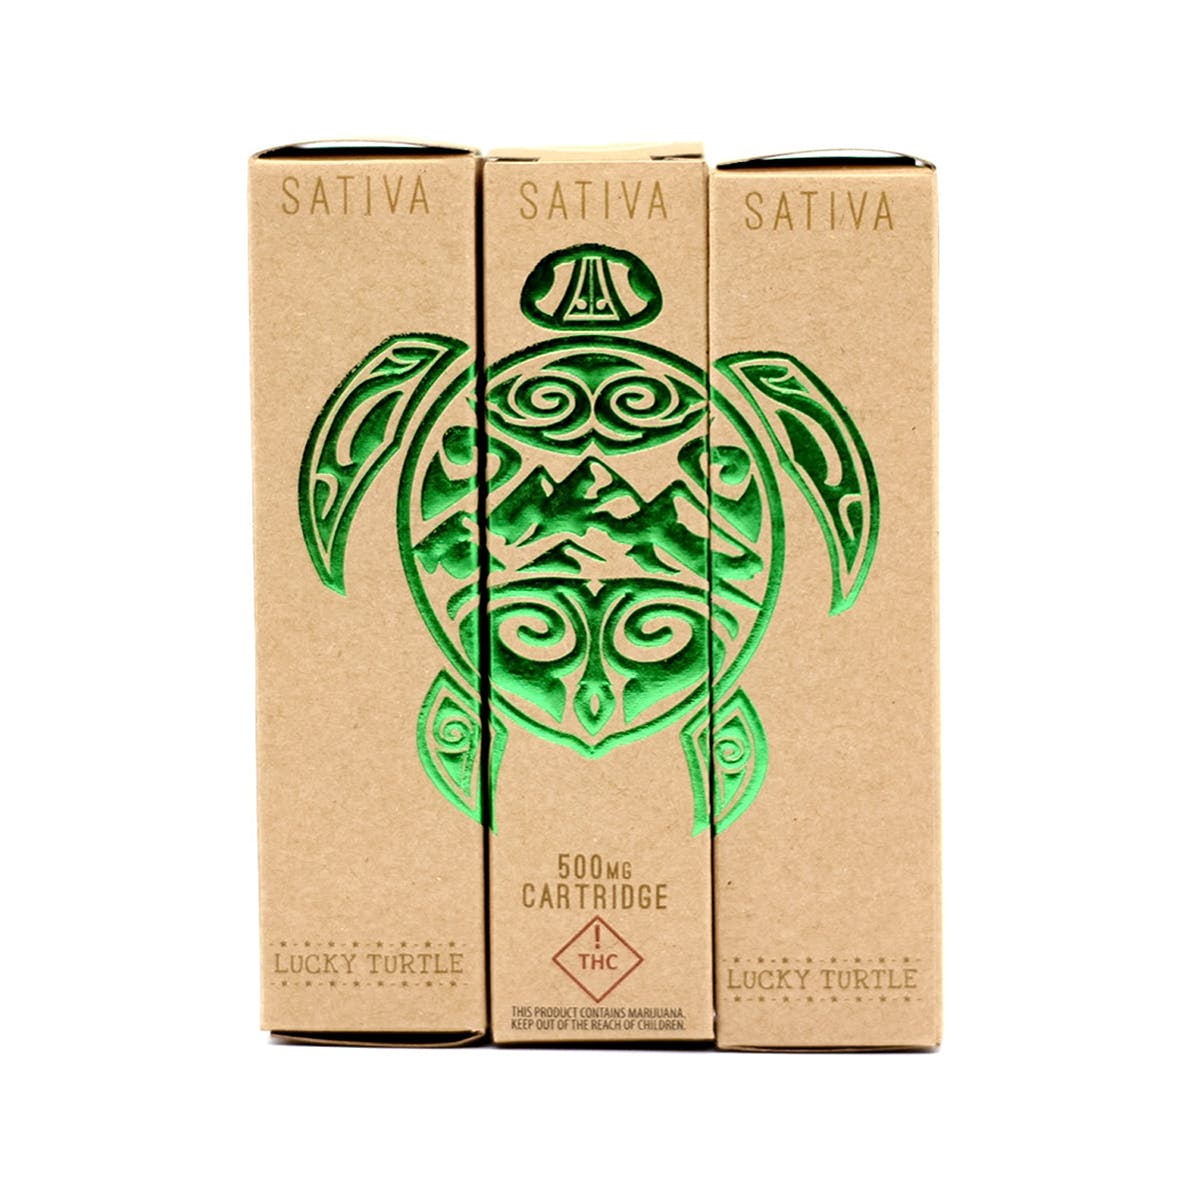 concentrate-lucky-turtle-sativa-vape-cartridge-500mg